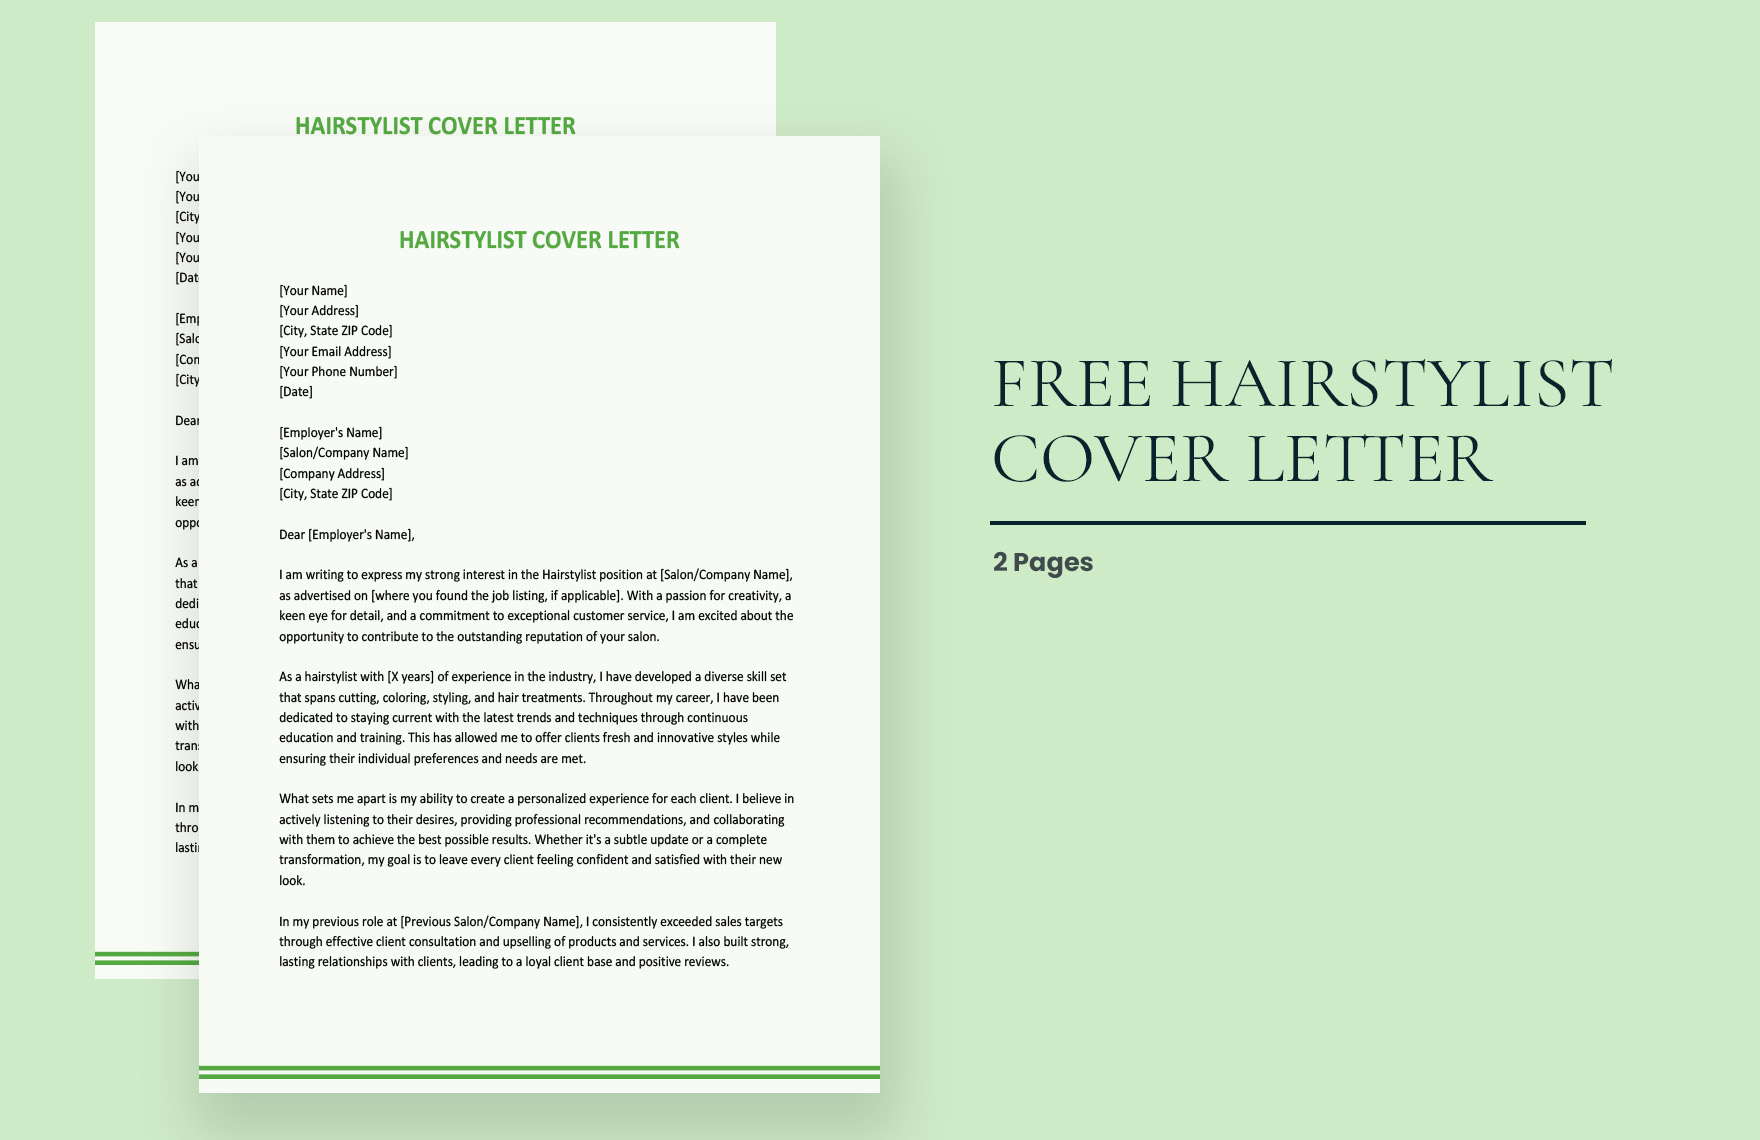 Hairstylist Cover Letter in Word, Google Docs